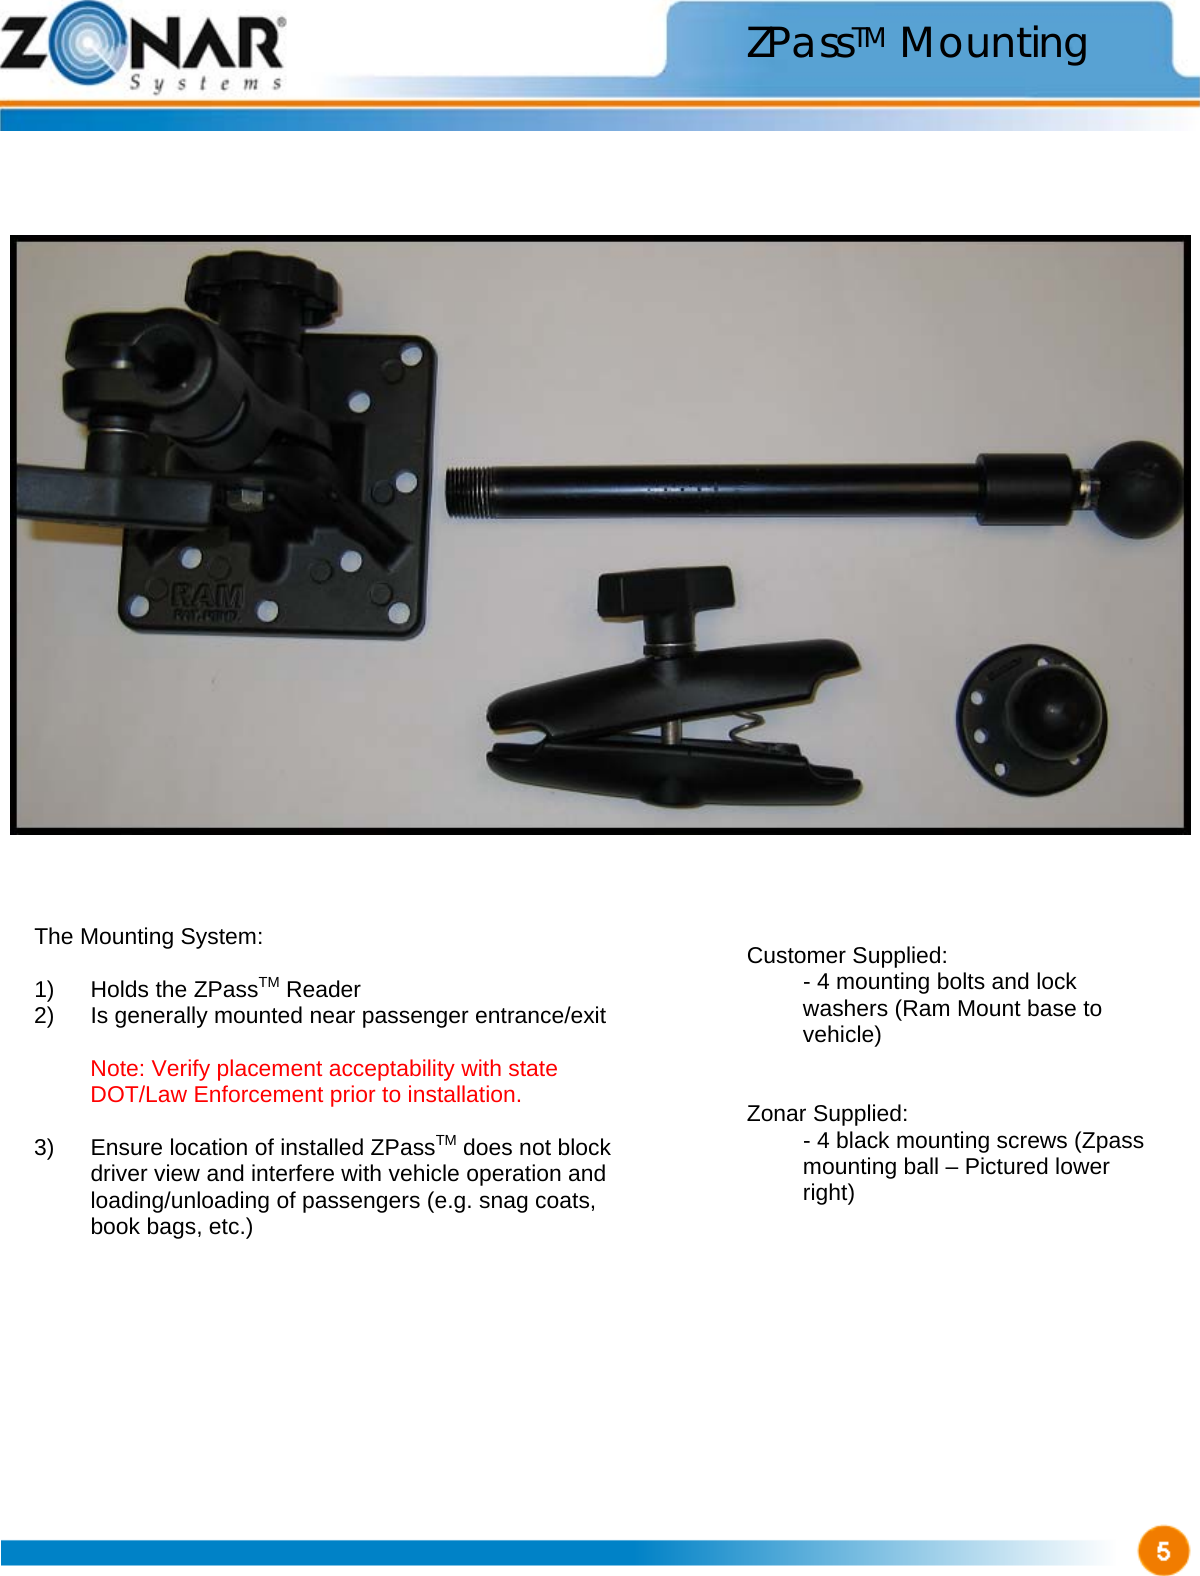                                    ZPassTM Mounting The Mounting System:  1)  Holds the ZPassTM Reader 2)  Is generally mounted near passenger entrance/exit   Note: Verify placement acceptability with state DOT/Law Enforcement prior to installation.   3)  Ensure location of installed ZPassTM does not block driver view and interfere with vehicle operation and loading/unloading of passengers (e.g. snag coats, book bags, etc.) Customer Supplied:   - 4 mounting bolts and lock washers (Ram Mount base to vehicle)   Zonar Supplied:   - 4 black mounting screws (Zpass mounting ball – Pictured lower right) 